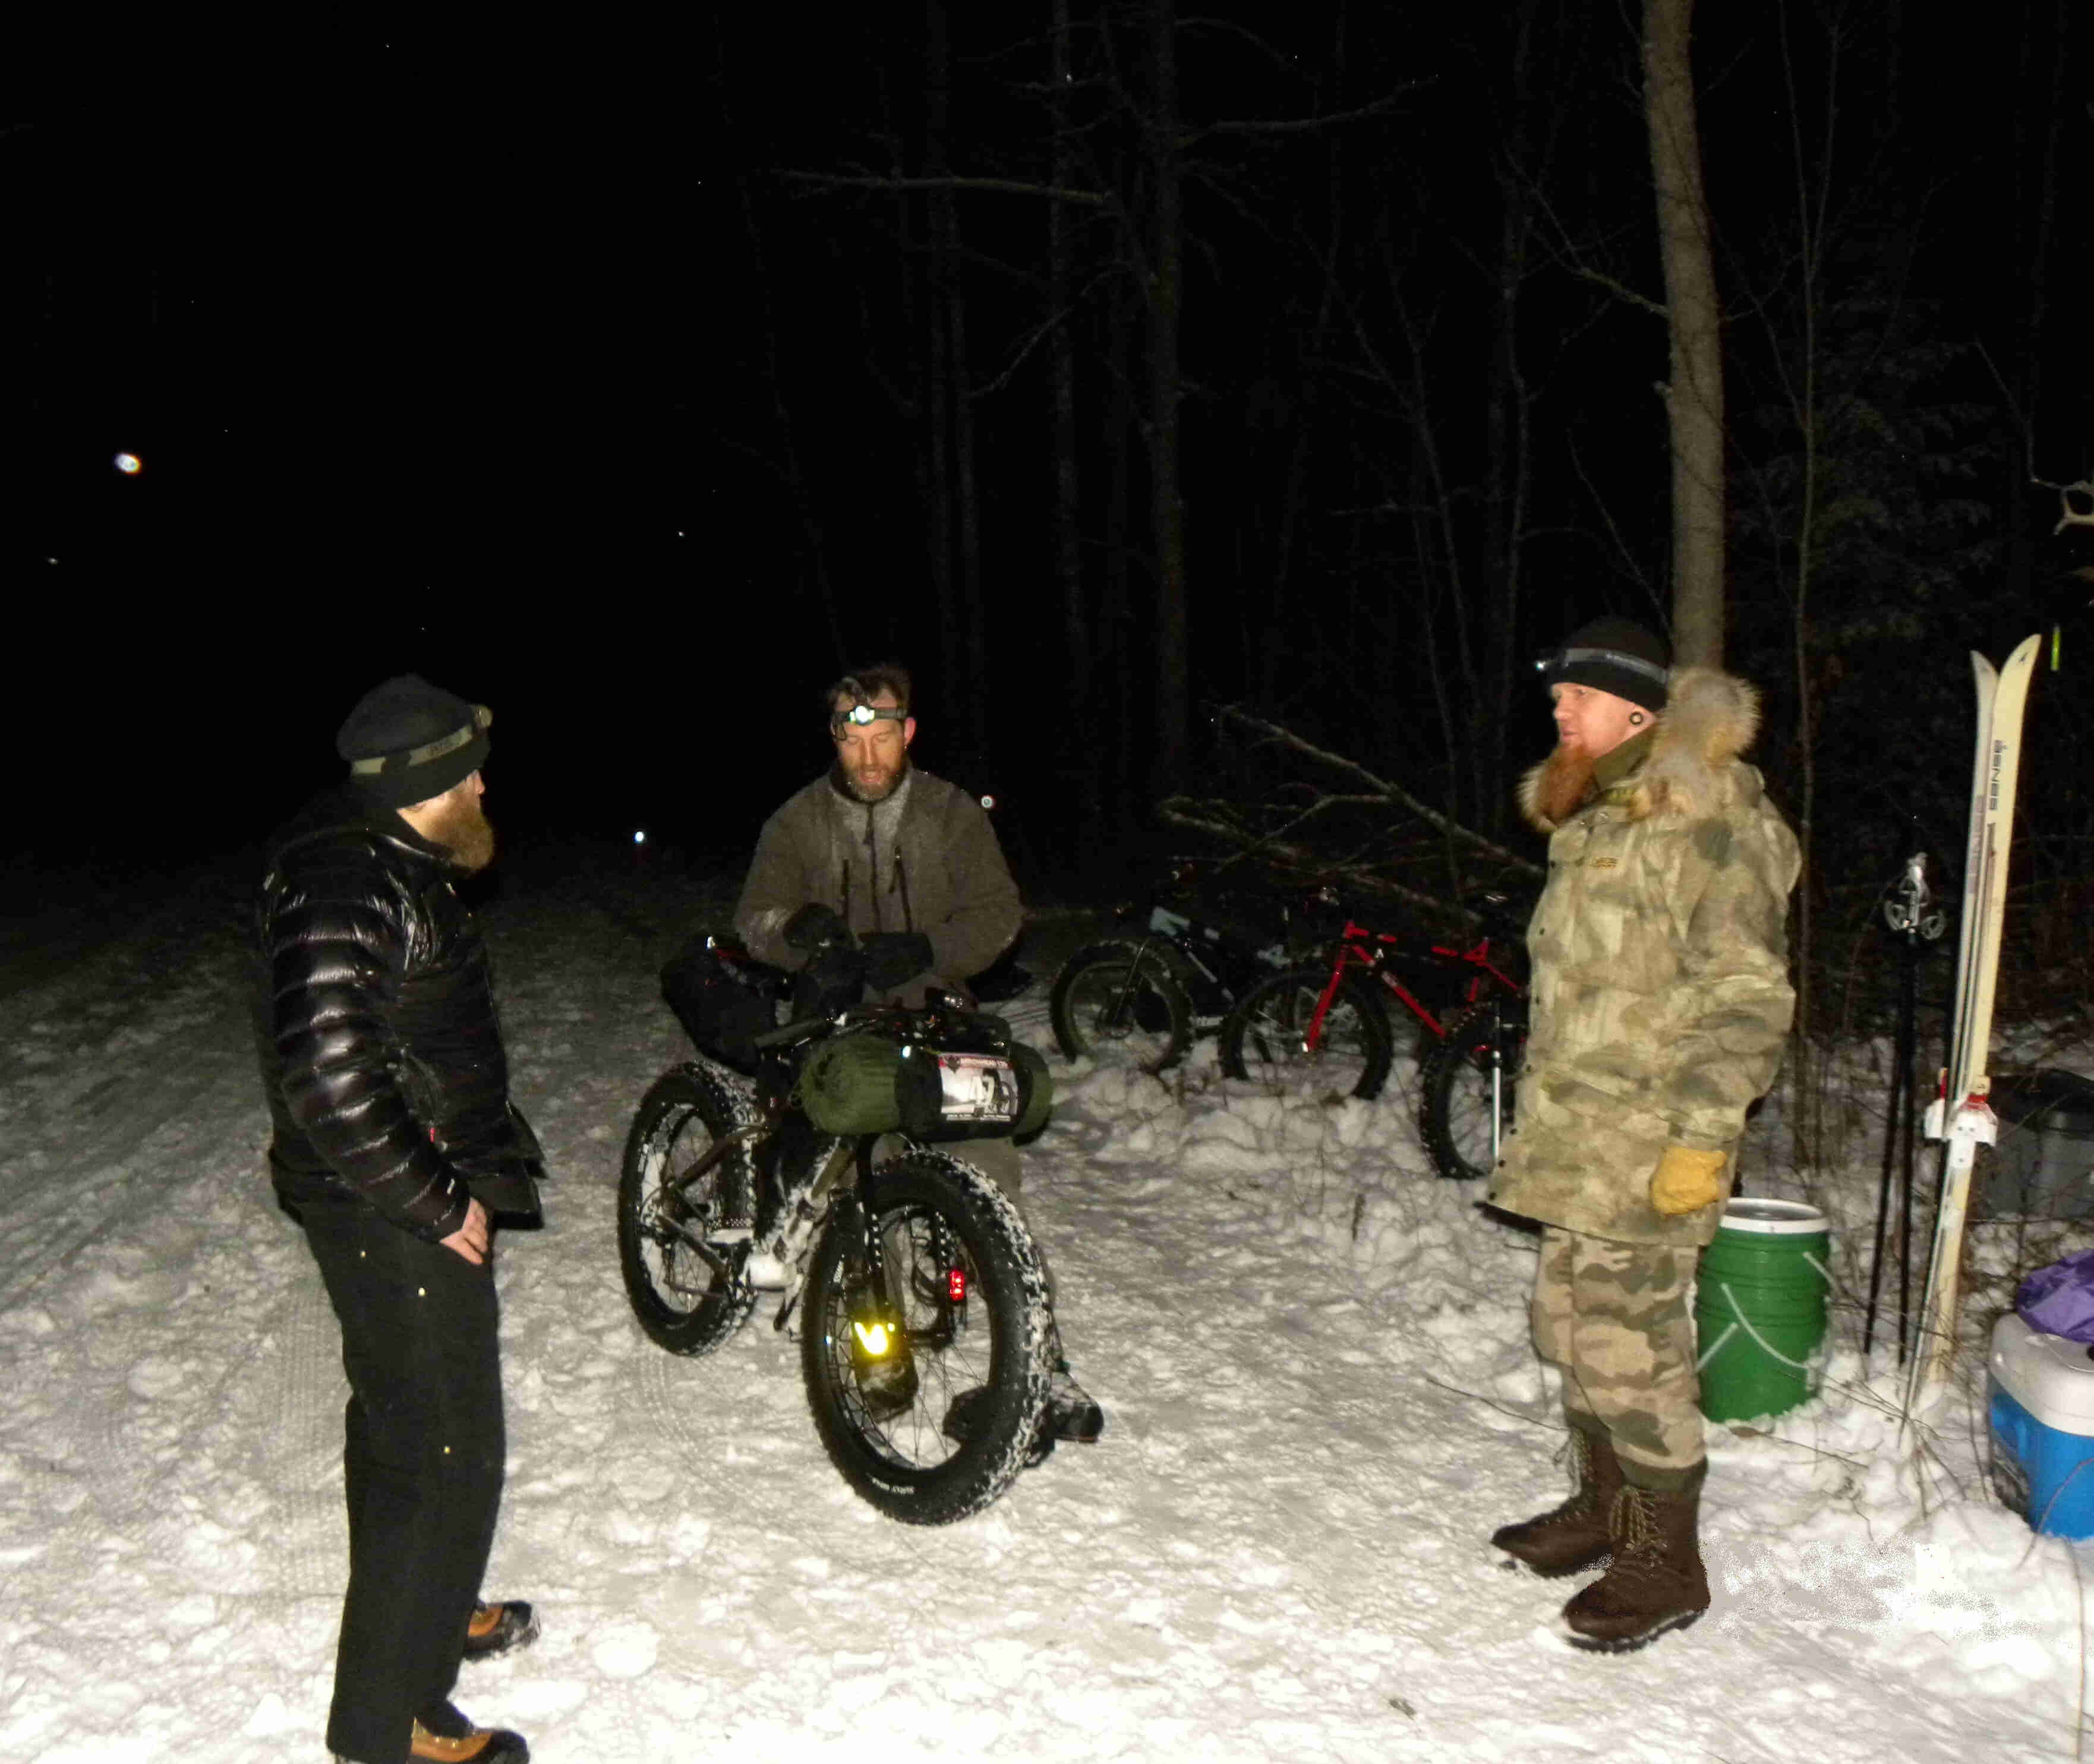 Two people wearing winter outerwear, with a cyclist and a Surly fat bike between them, on a snow covered road at night